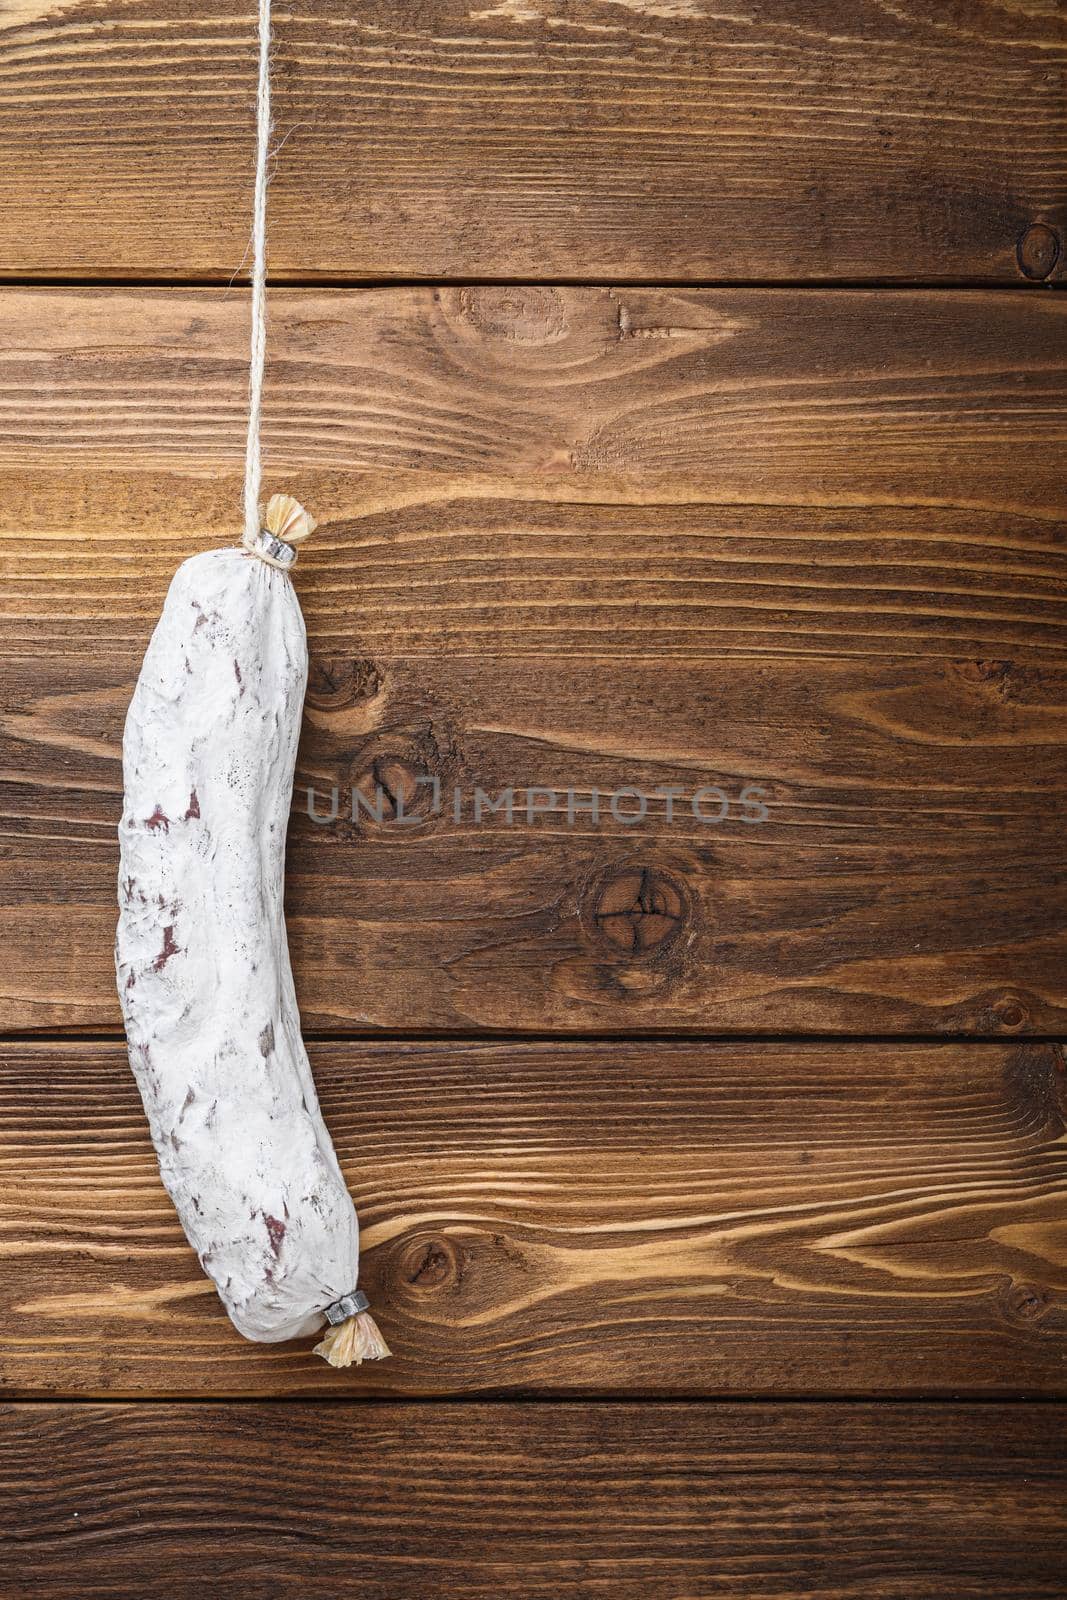 Salchichon sausage on light wooden background, top view with copy space.